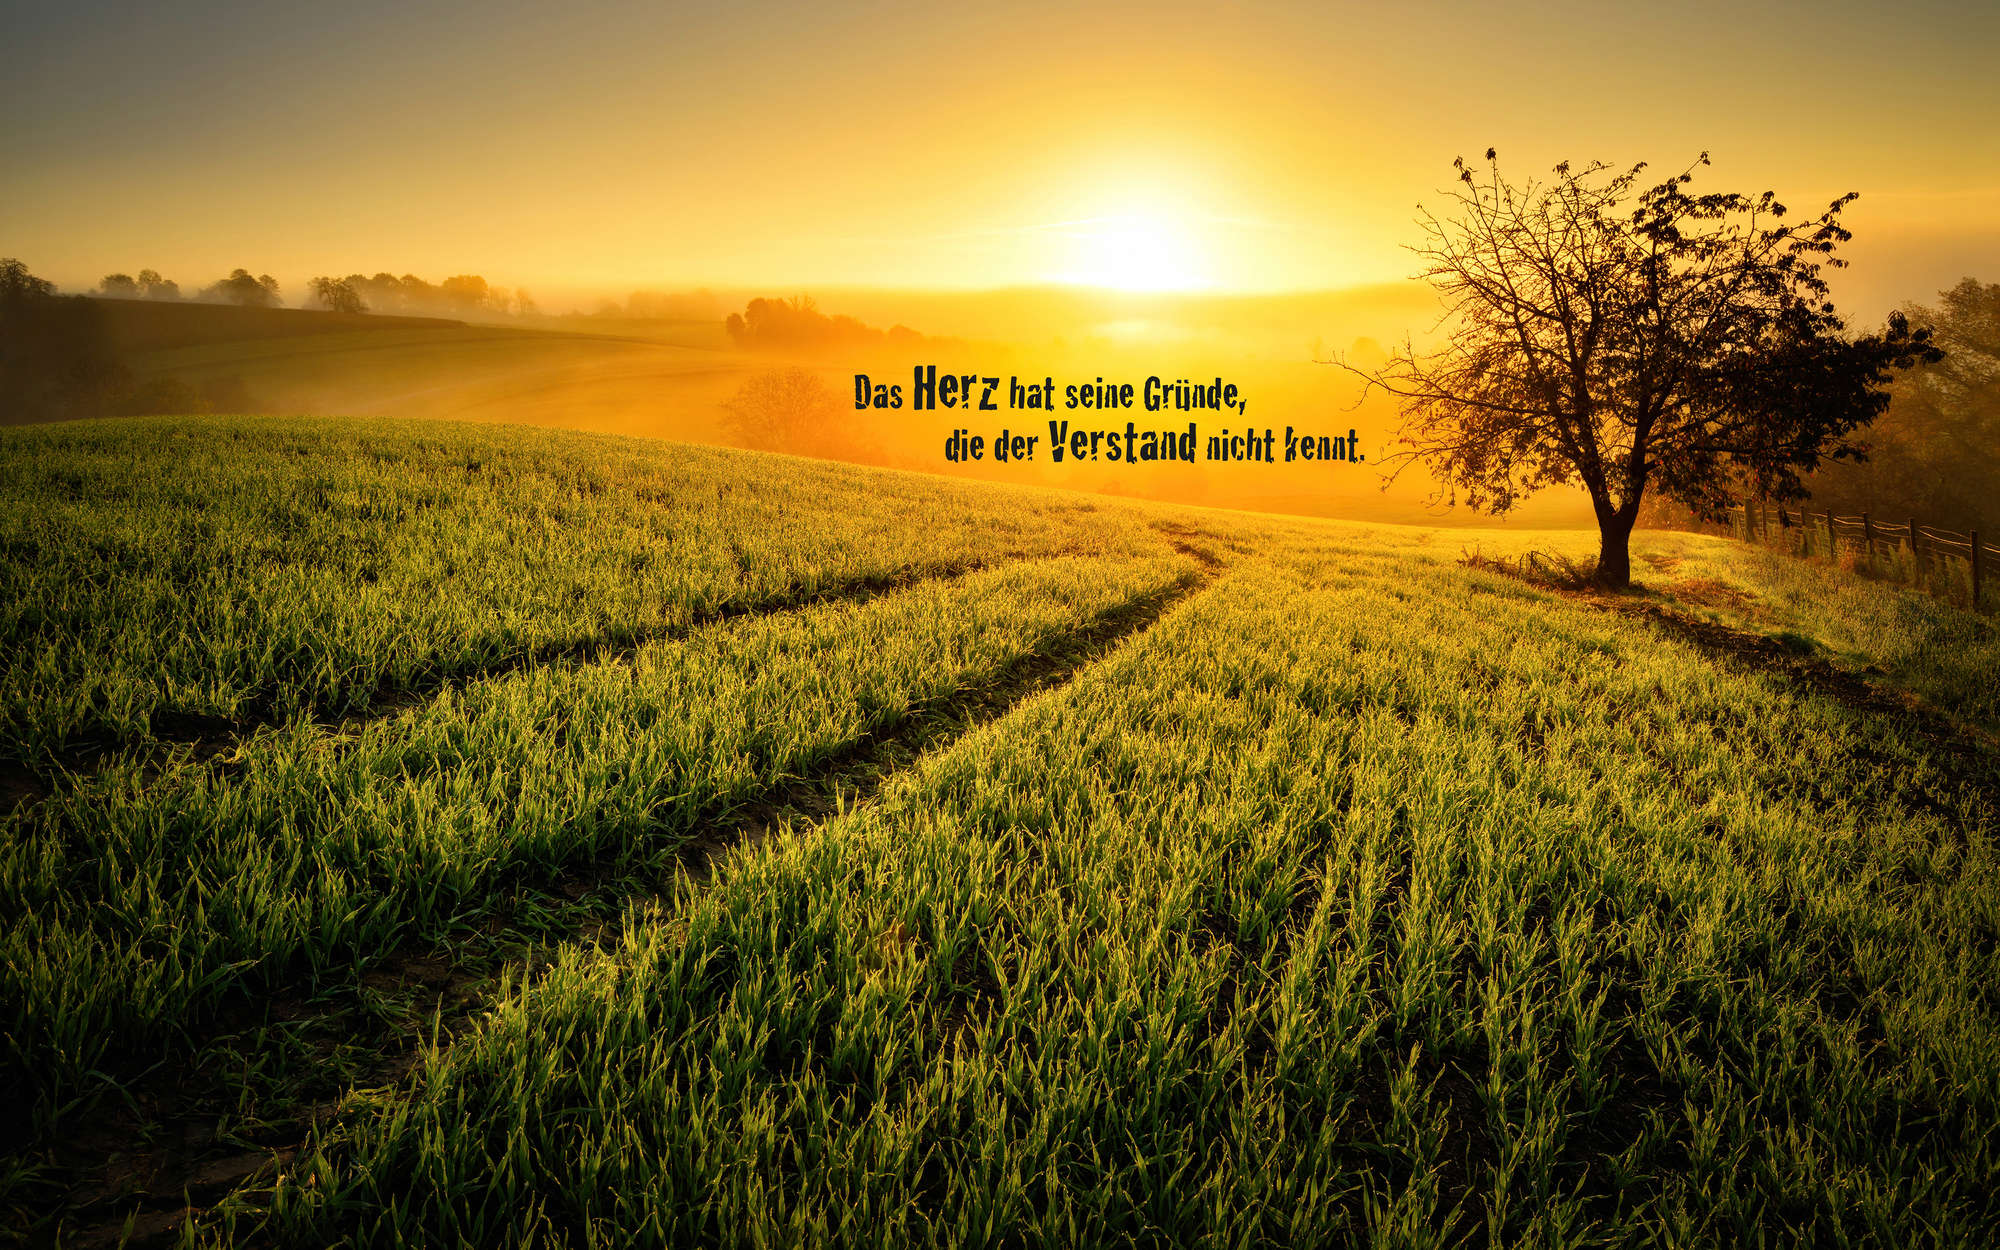             Photo wallpaper Field in the morning with lettering - Matt smooth non-woven
        